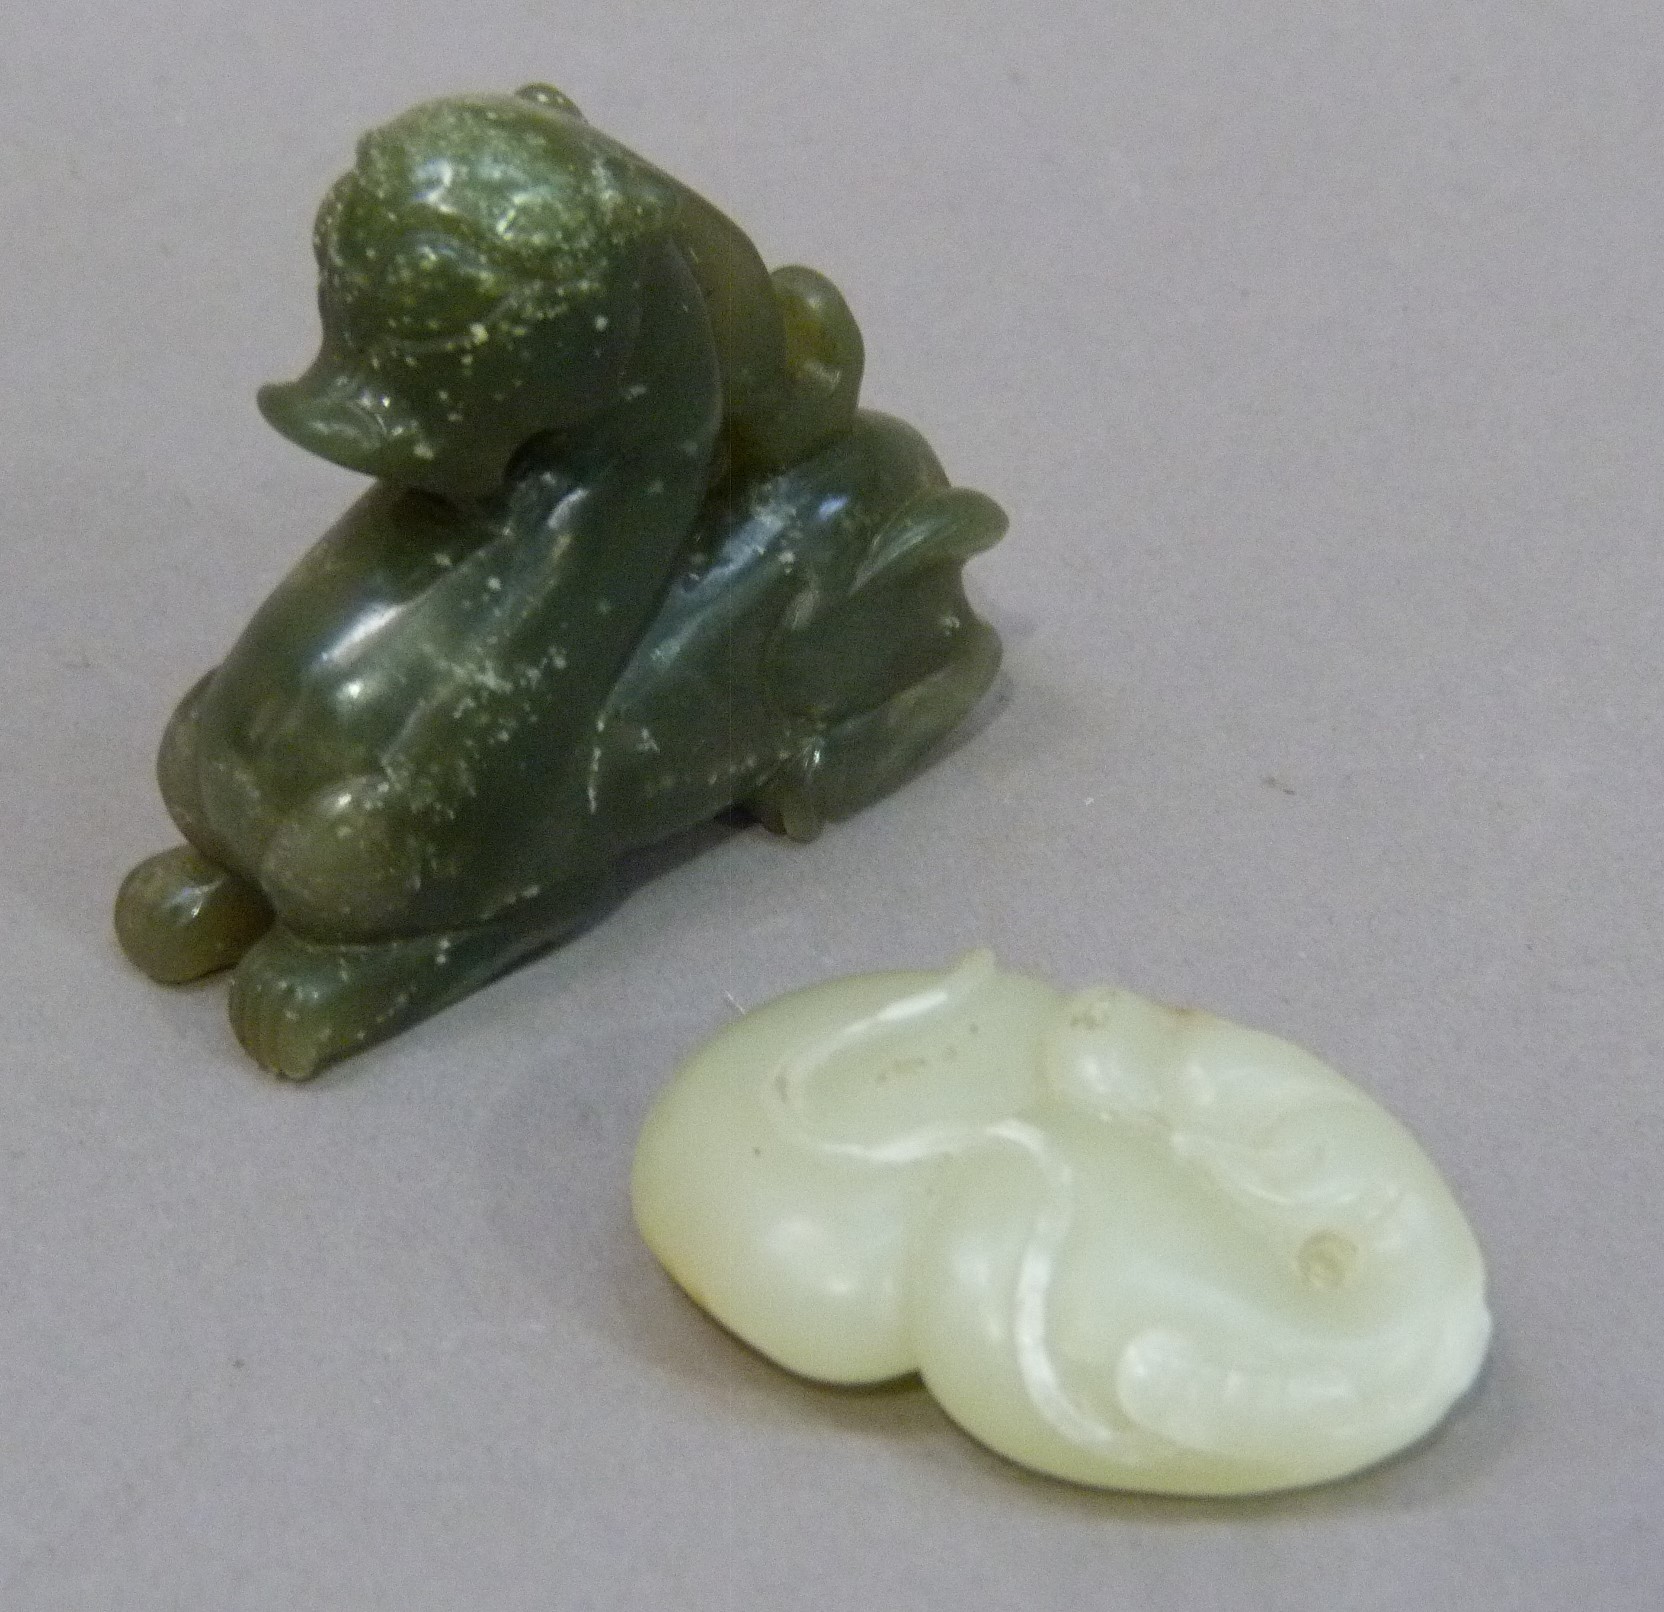 Two jadeite carvings of a dragon and an insect sitting upon a peach, dragon 6cm x 5.5cm, insect